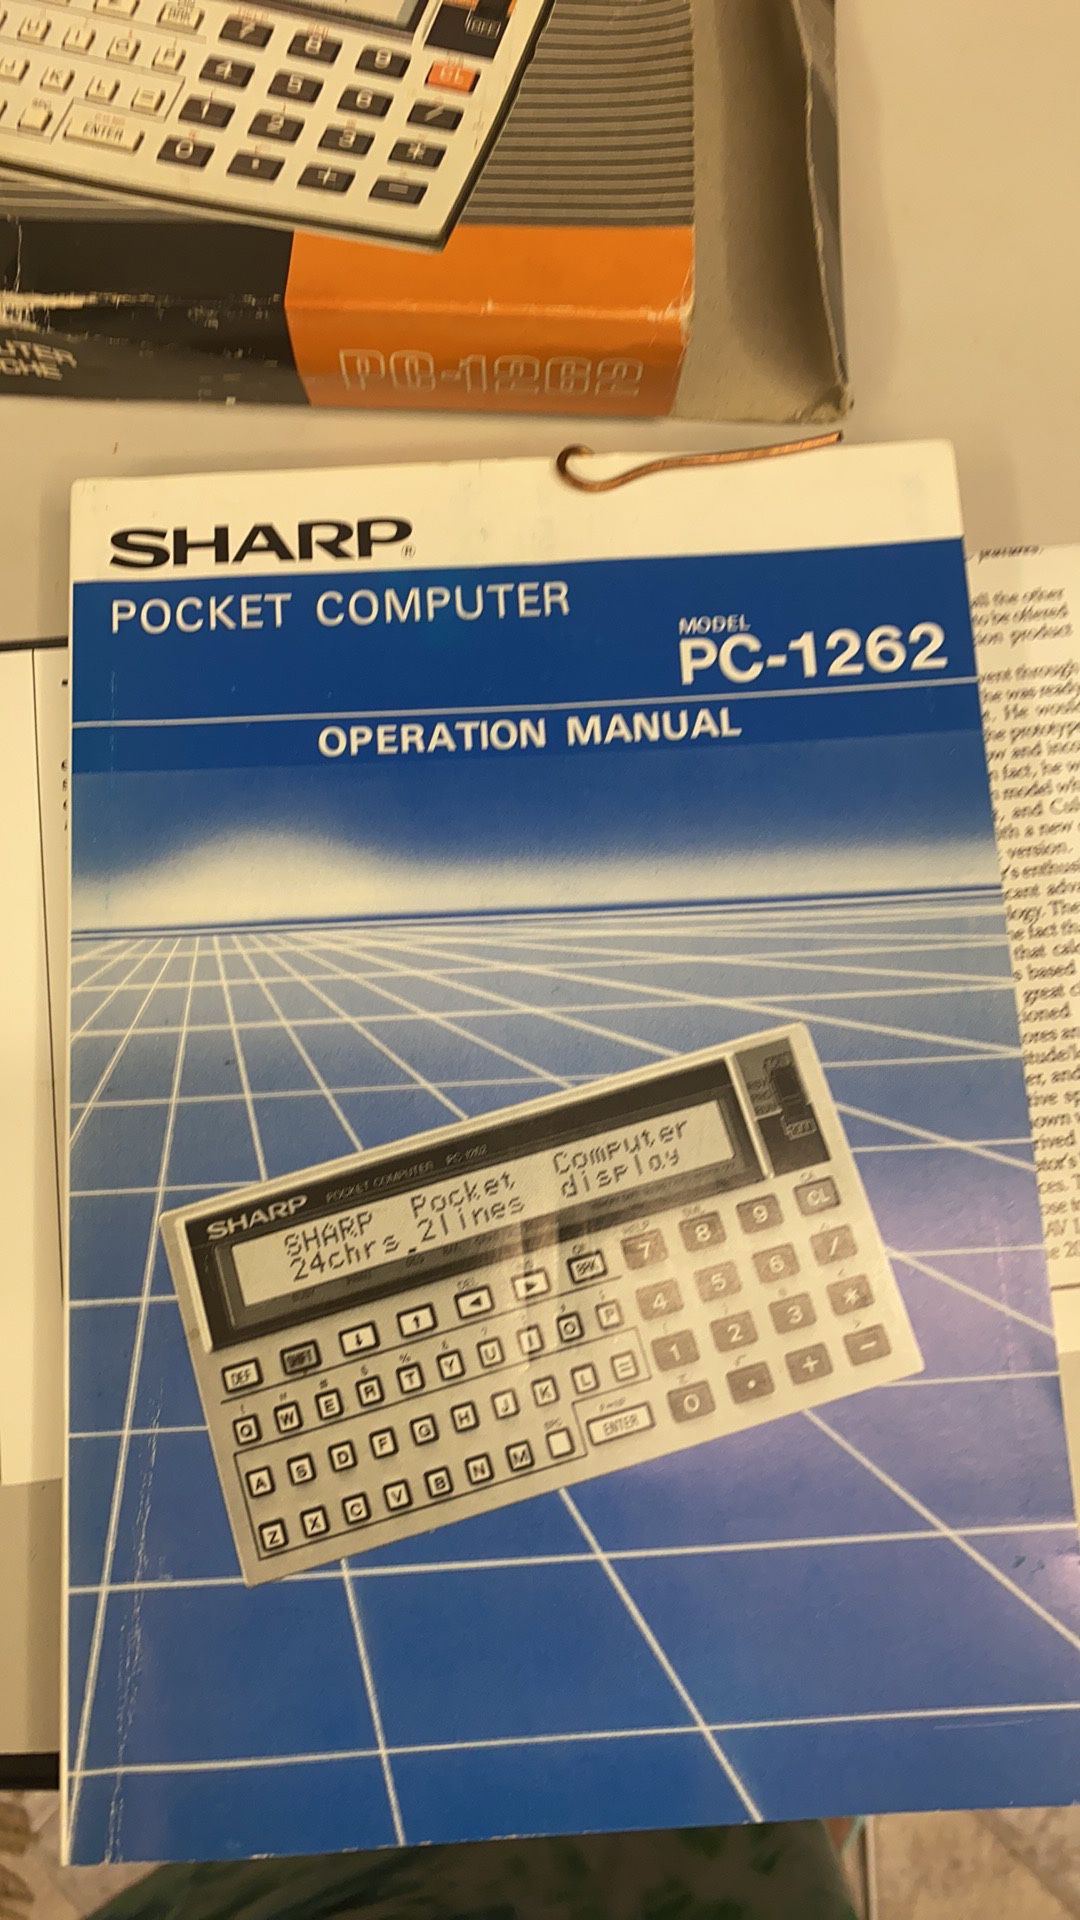 BNWT Sharp Pocket Computer Pc-1262 for Sale in New Prt Rchy, FL - OfferUp